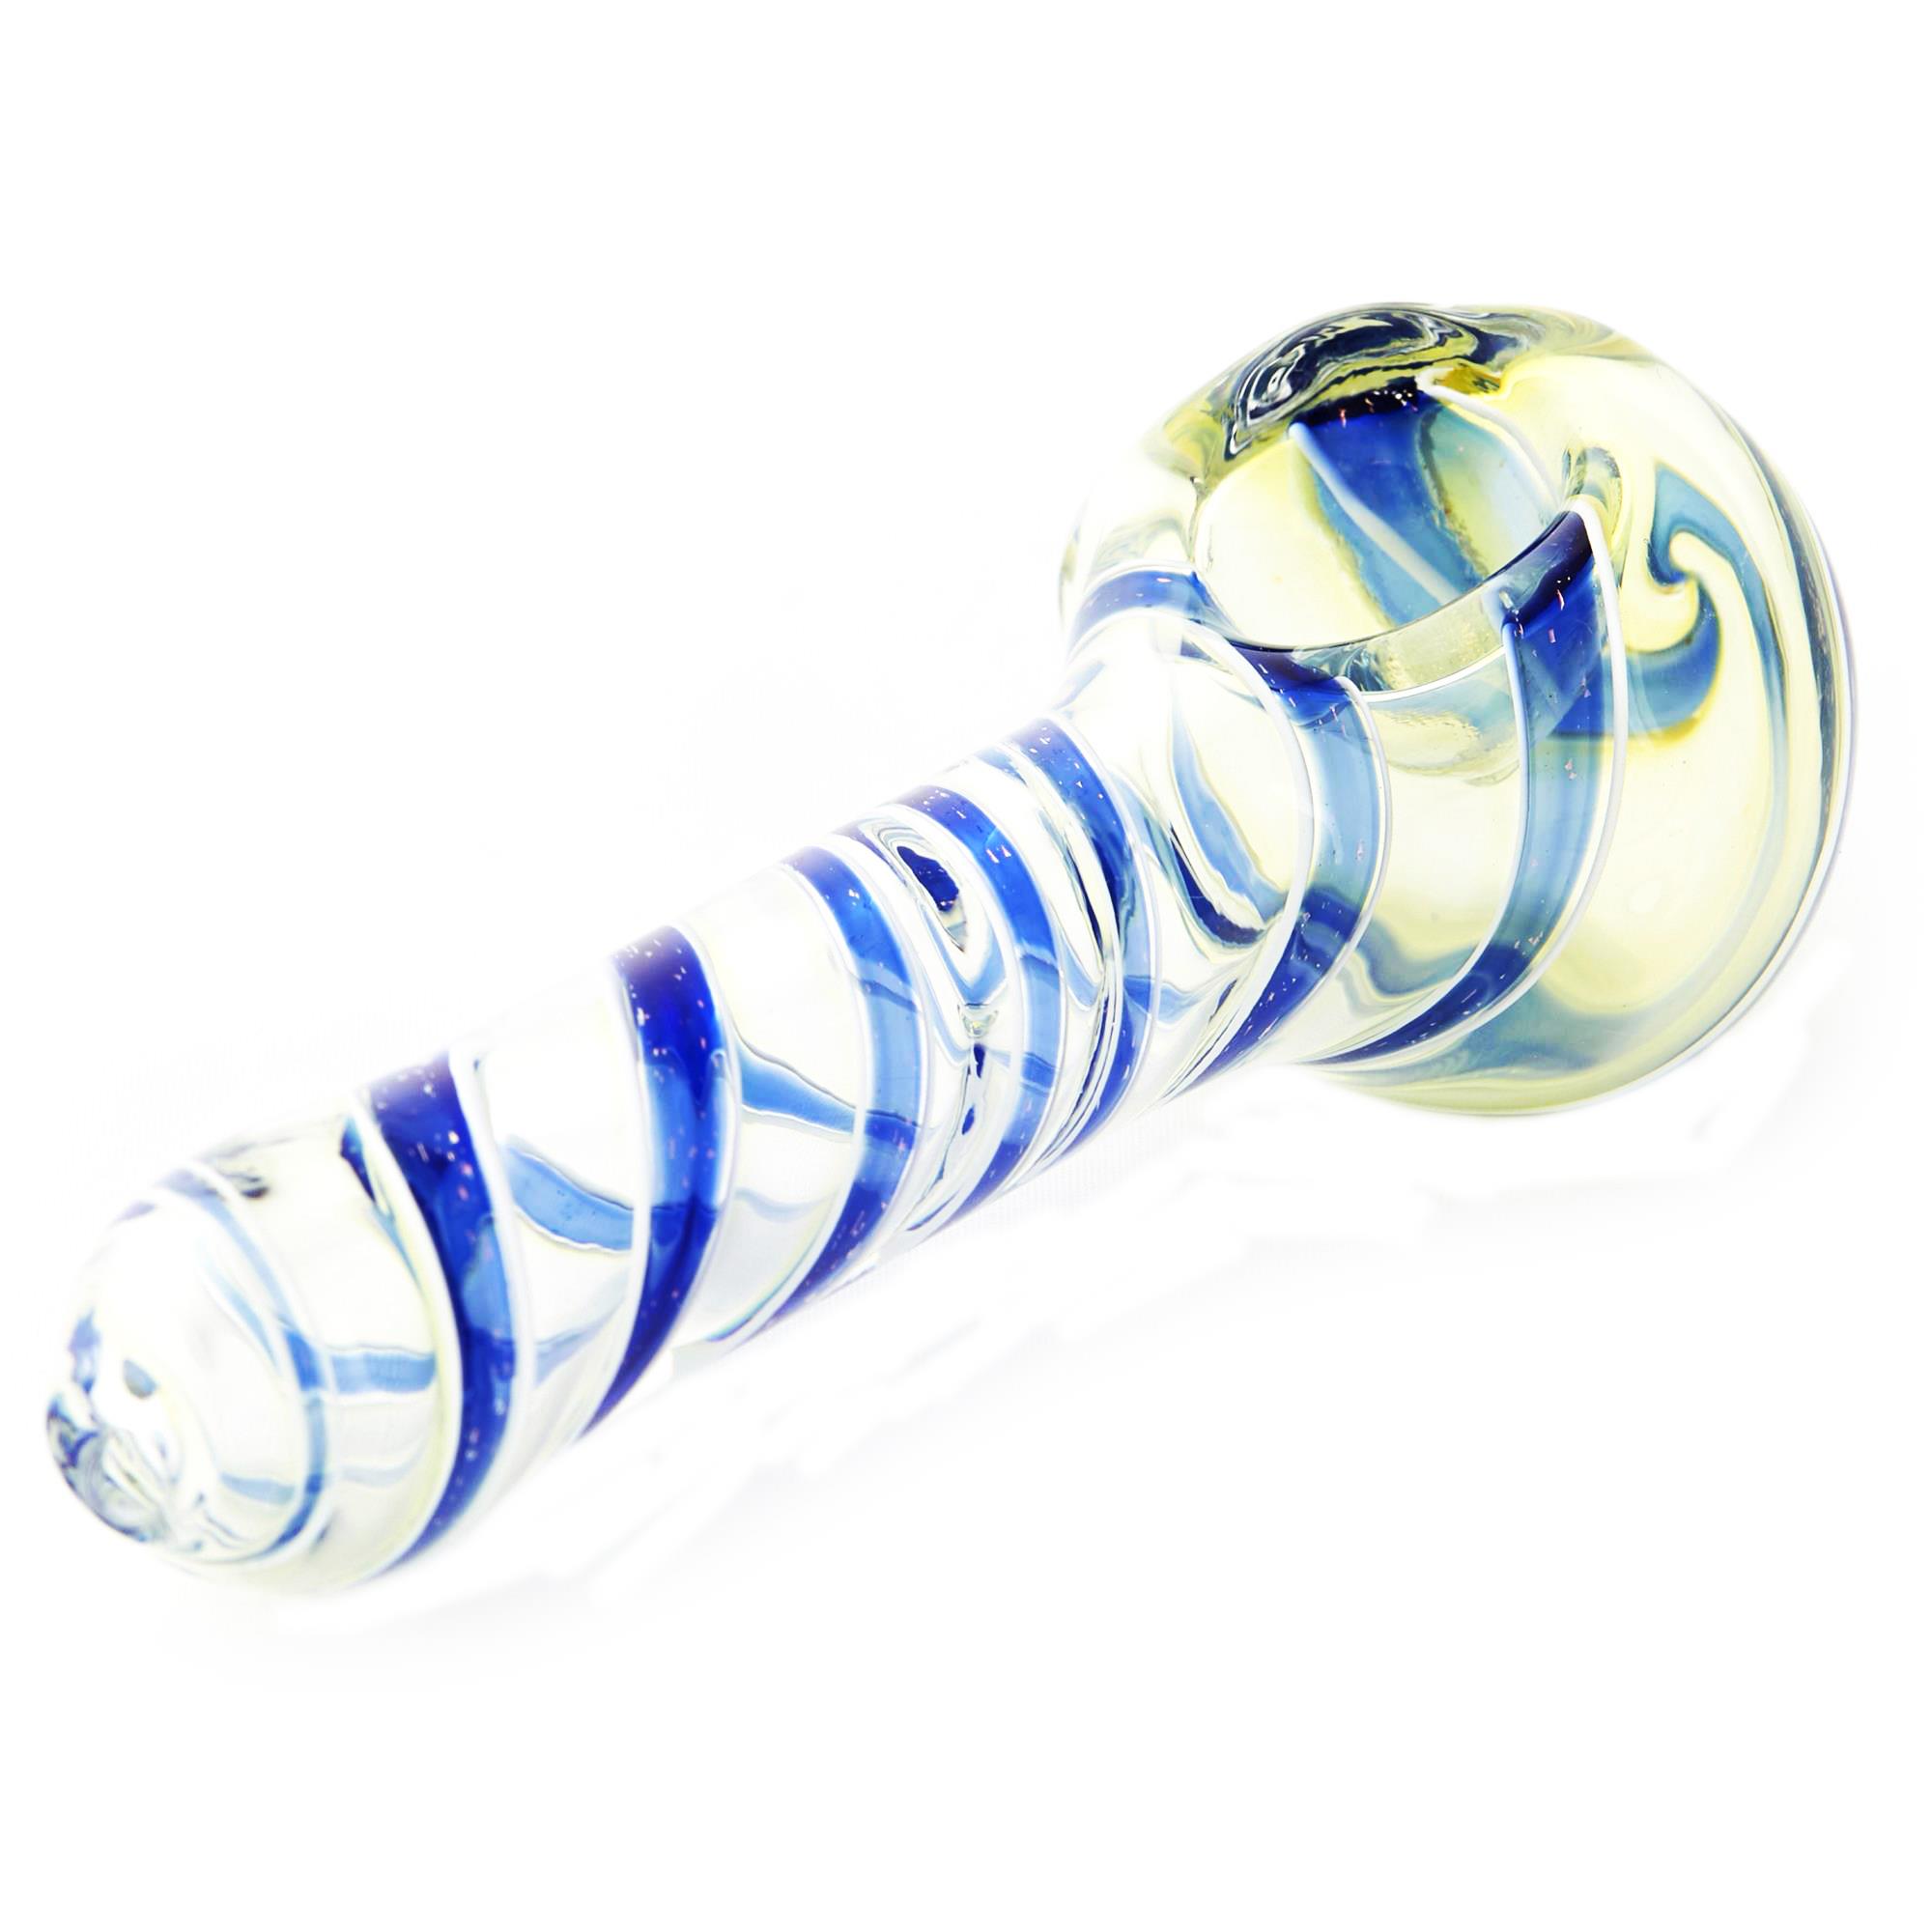 BAKED SPOON PIPE